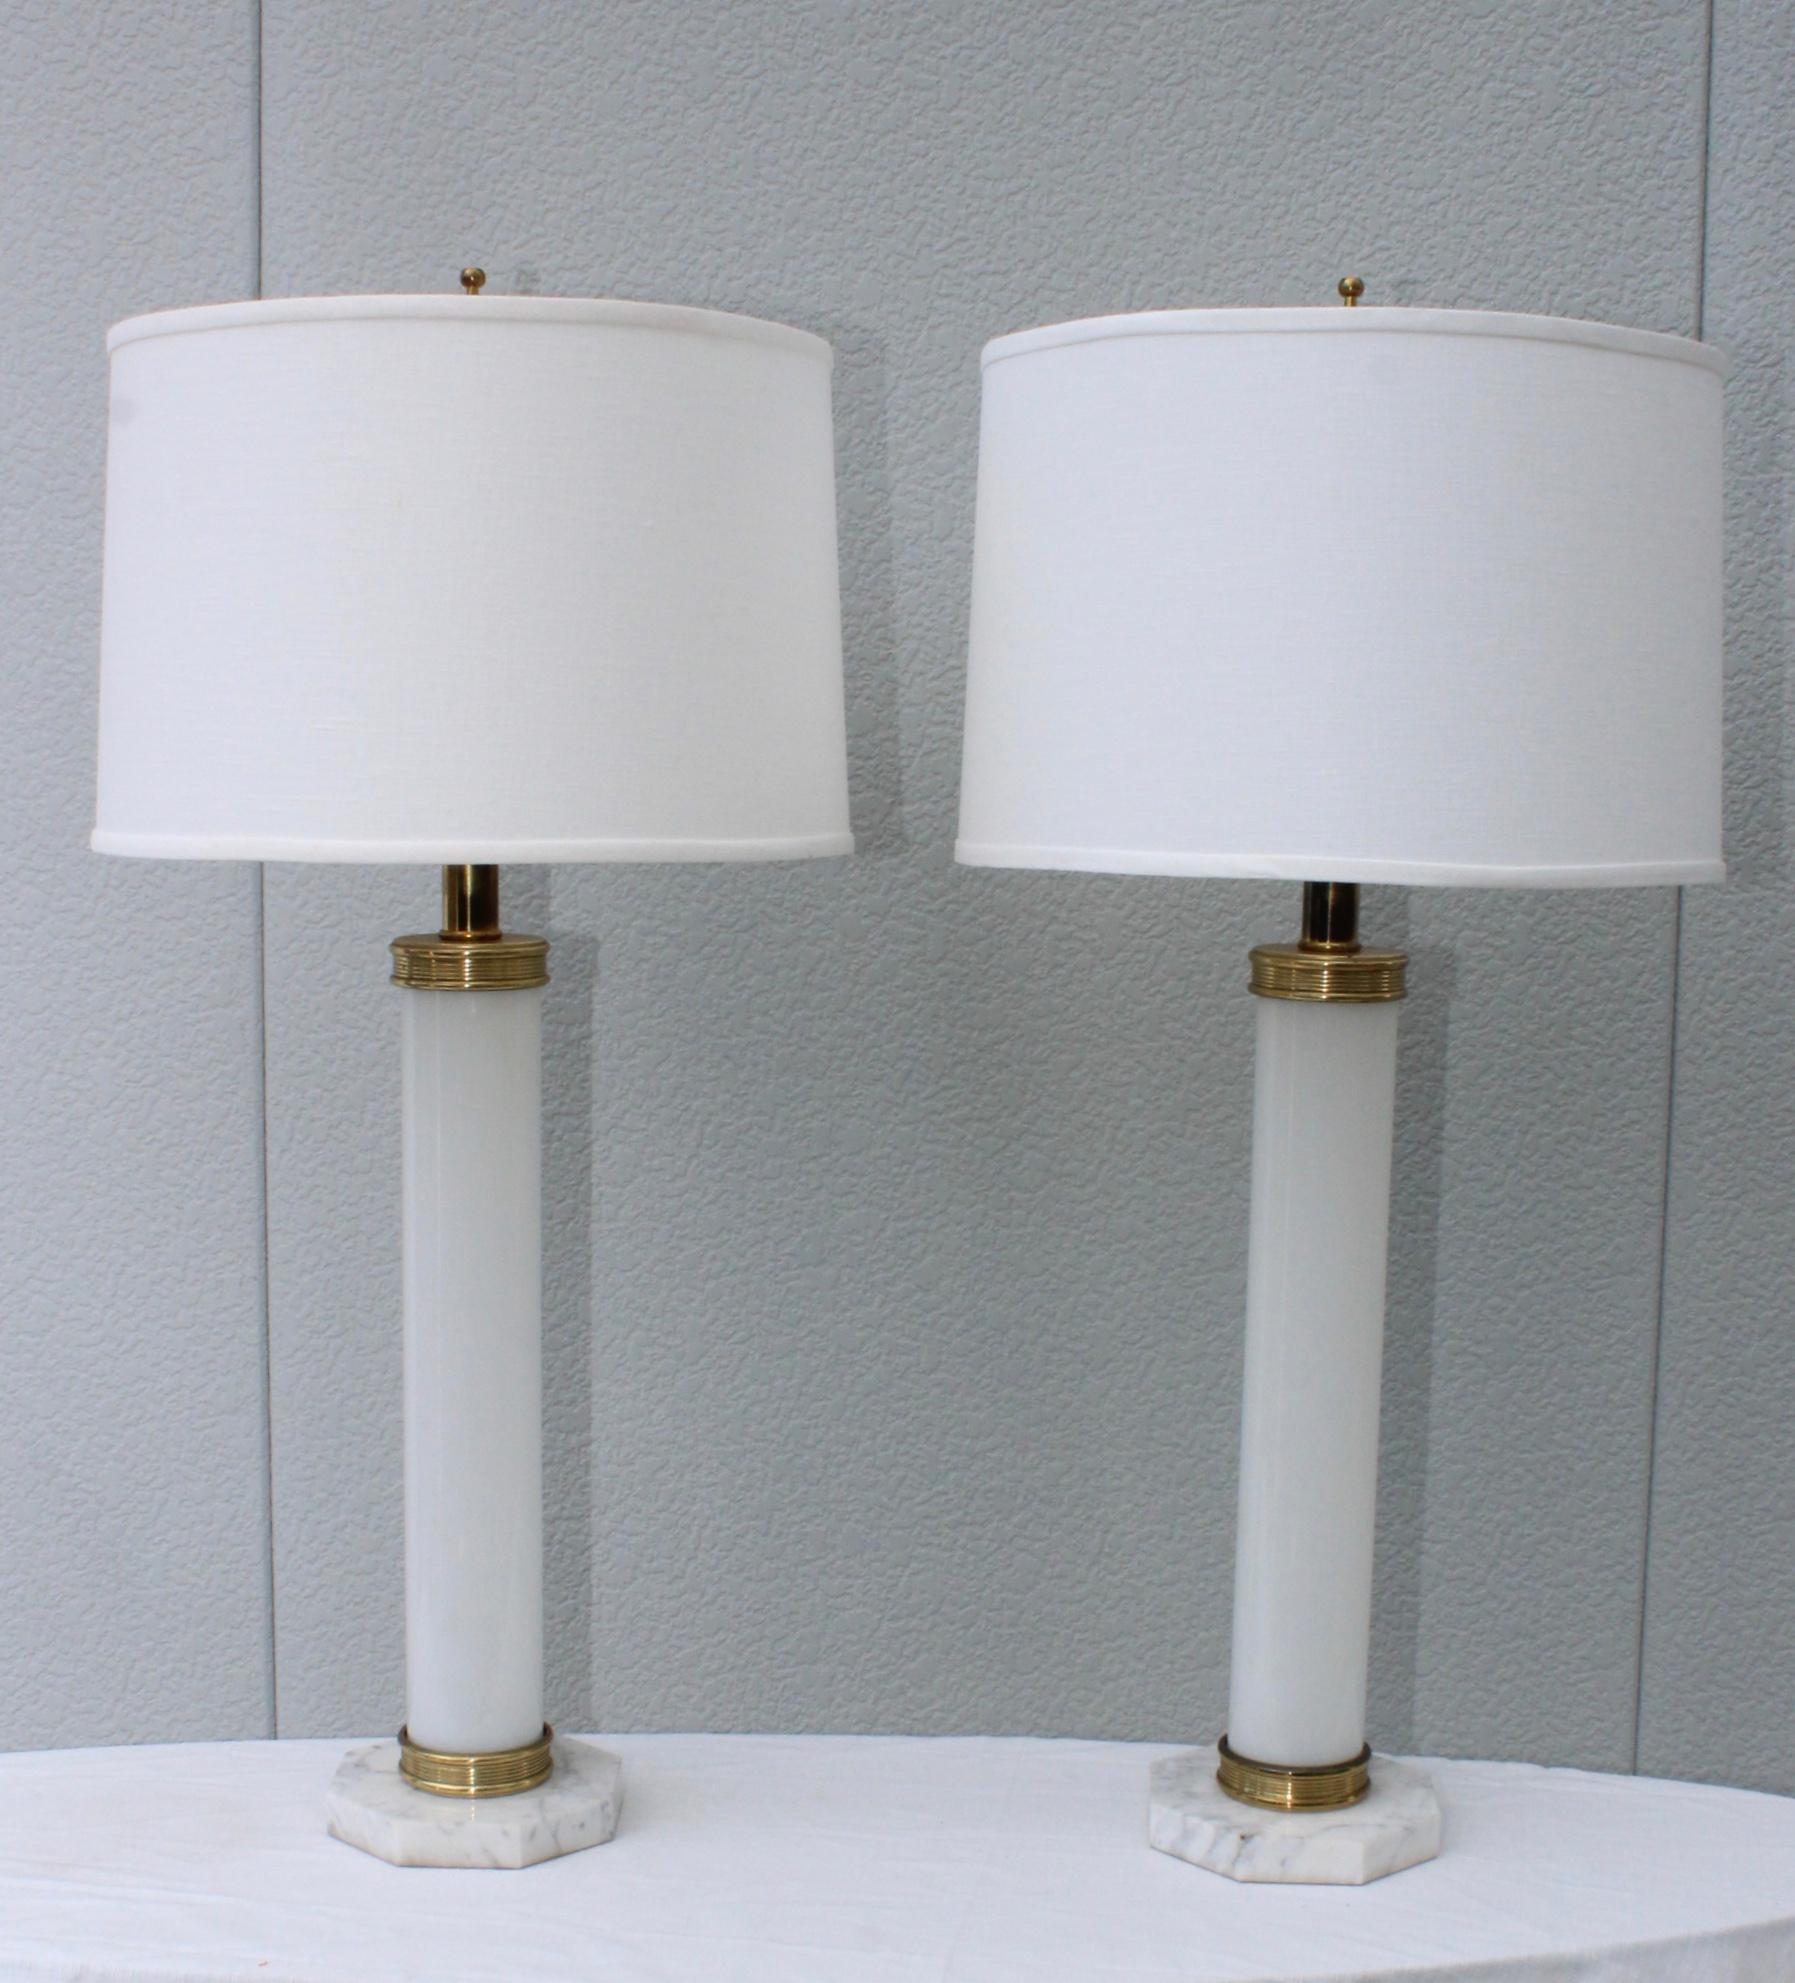 1960's Mid-Century Modern Italian table lamps with Carrara marble base glass and brass, in vintage original condition with some wear and patina due to age and use.

Height to light socket 28.5''

Shades for photography only.